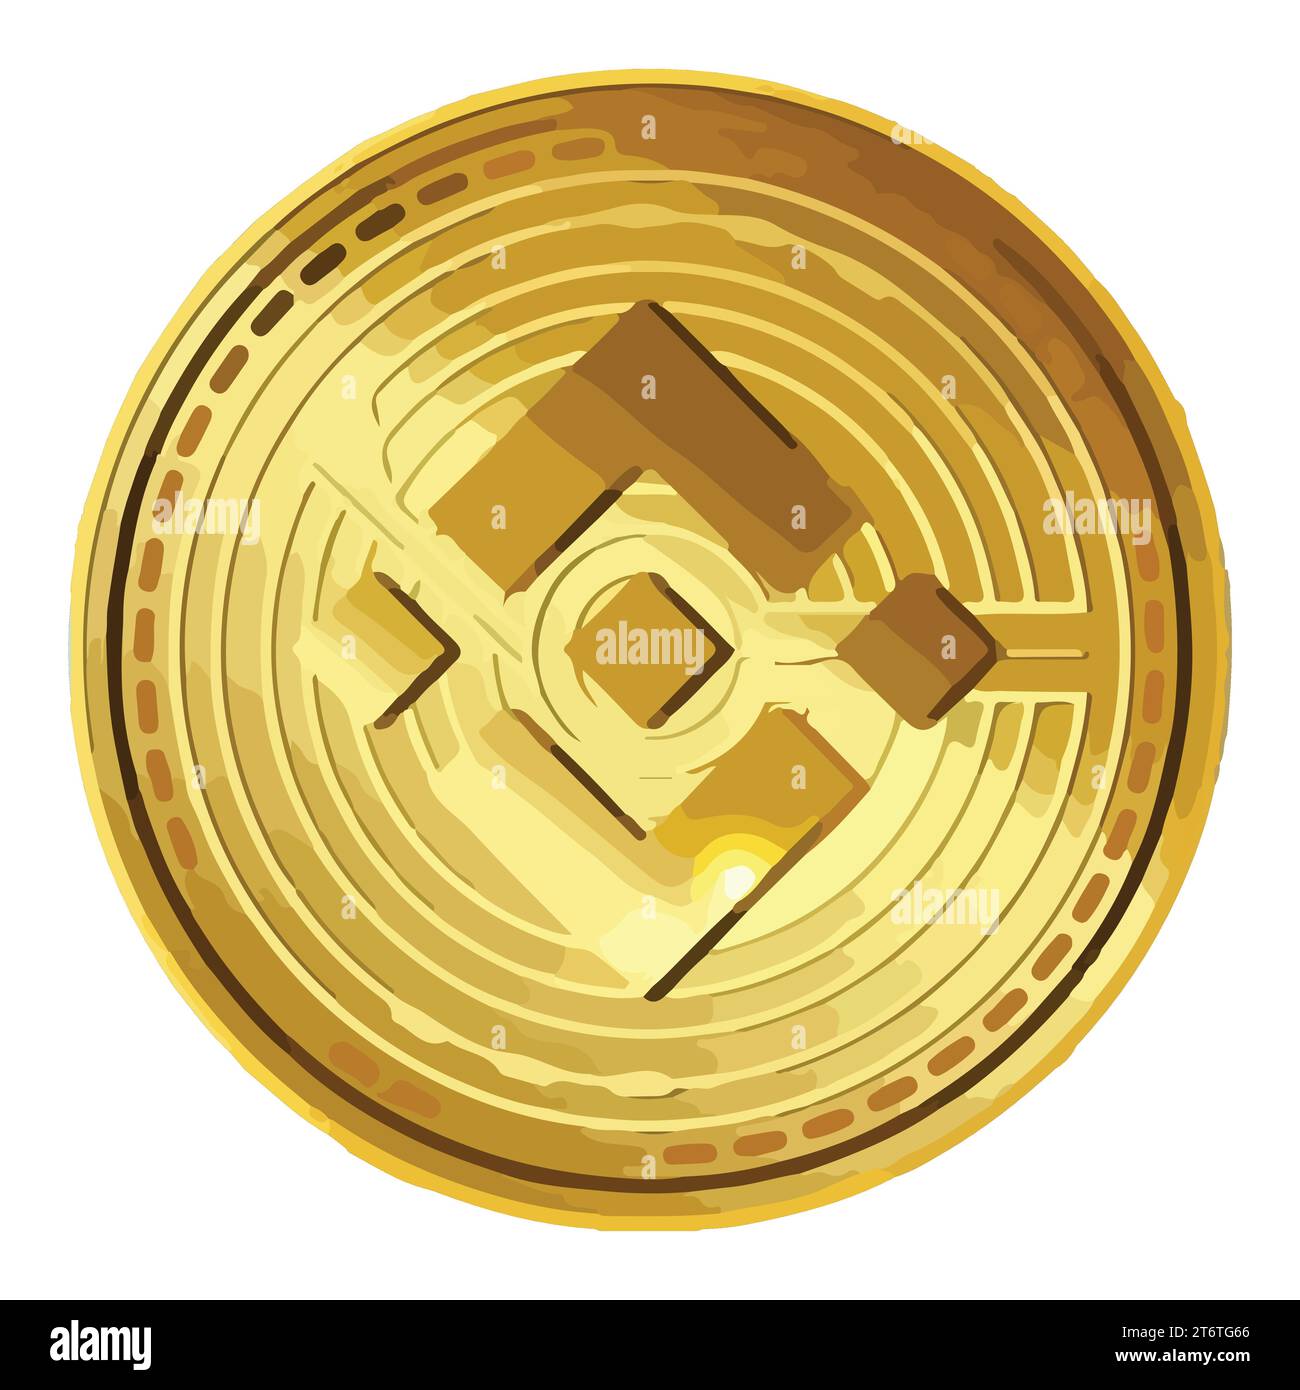 Binance Coin Cryptocurrency Vector Illustration Abstract Editable image Stock Vector